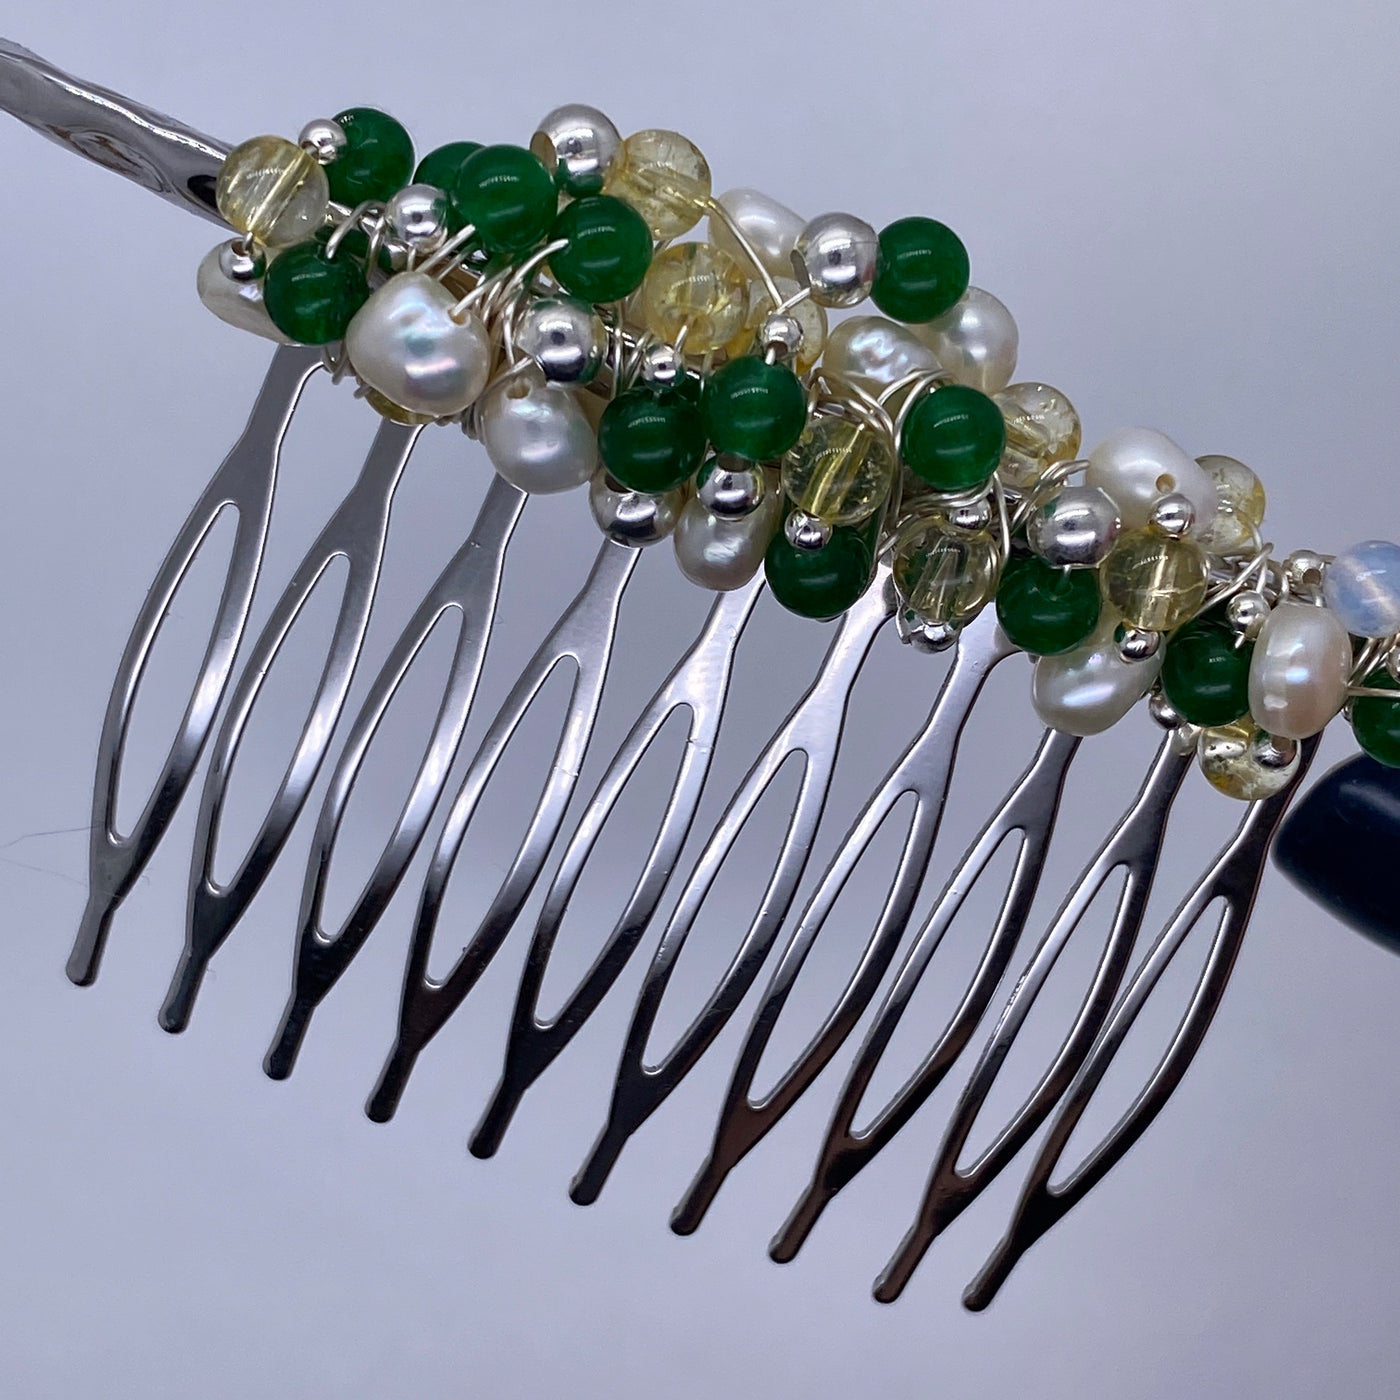 Green clachedony, citrines, opales, silver wire and freshwater pearls on french twist 10 teeths comb alloy metal bridal wedding hair side comb silver color